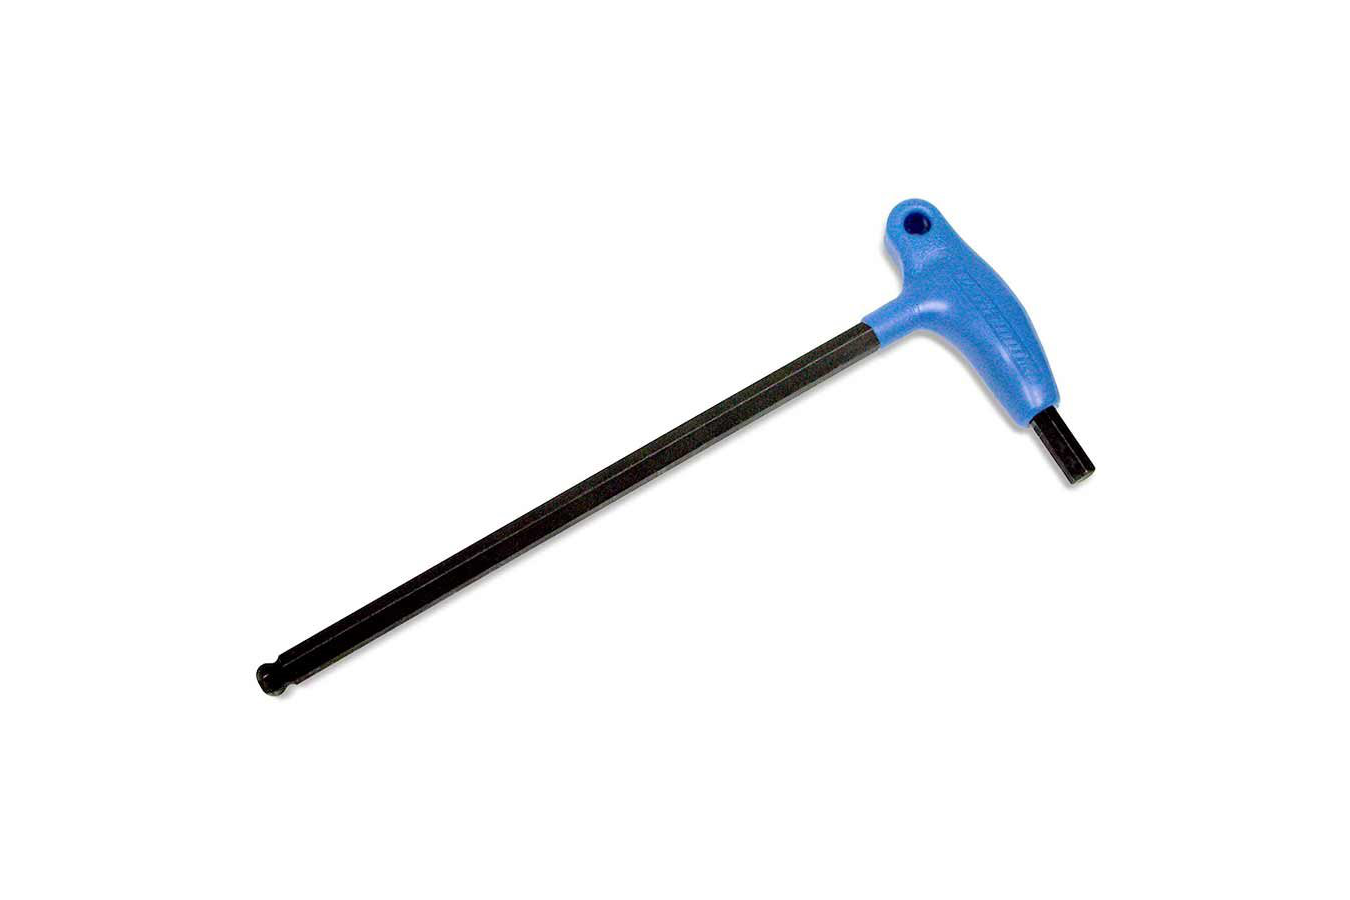 Park Tool PH-10 Hex Wrench P-Handled